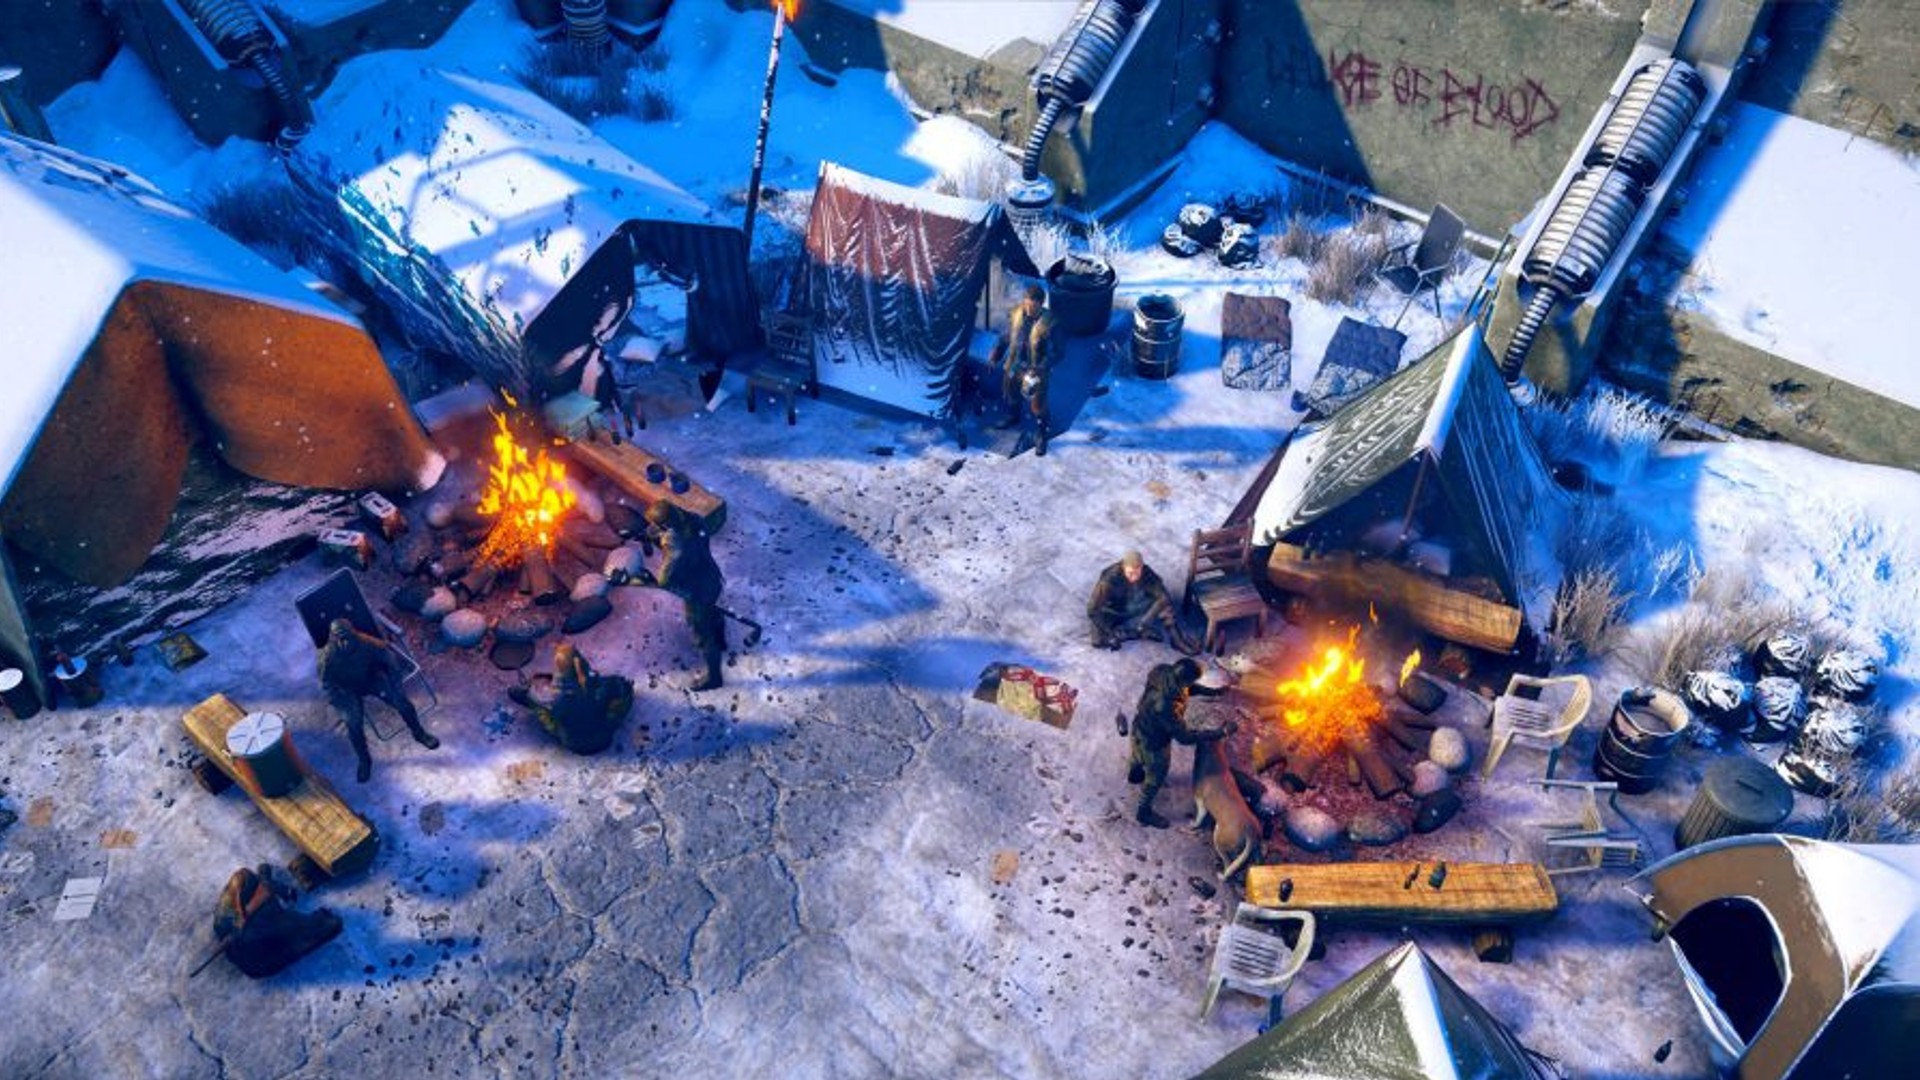 Best RPG games: Wasteland 3. Image shows a run down camp in a snowy locale.